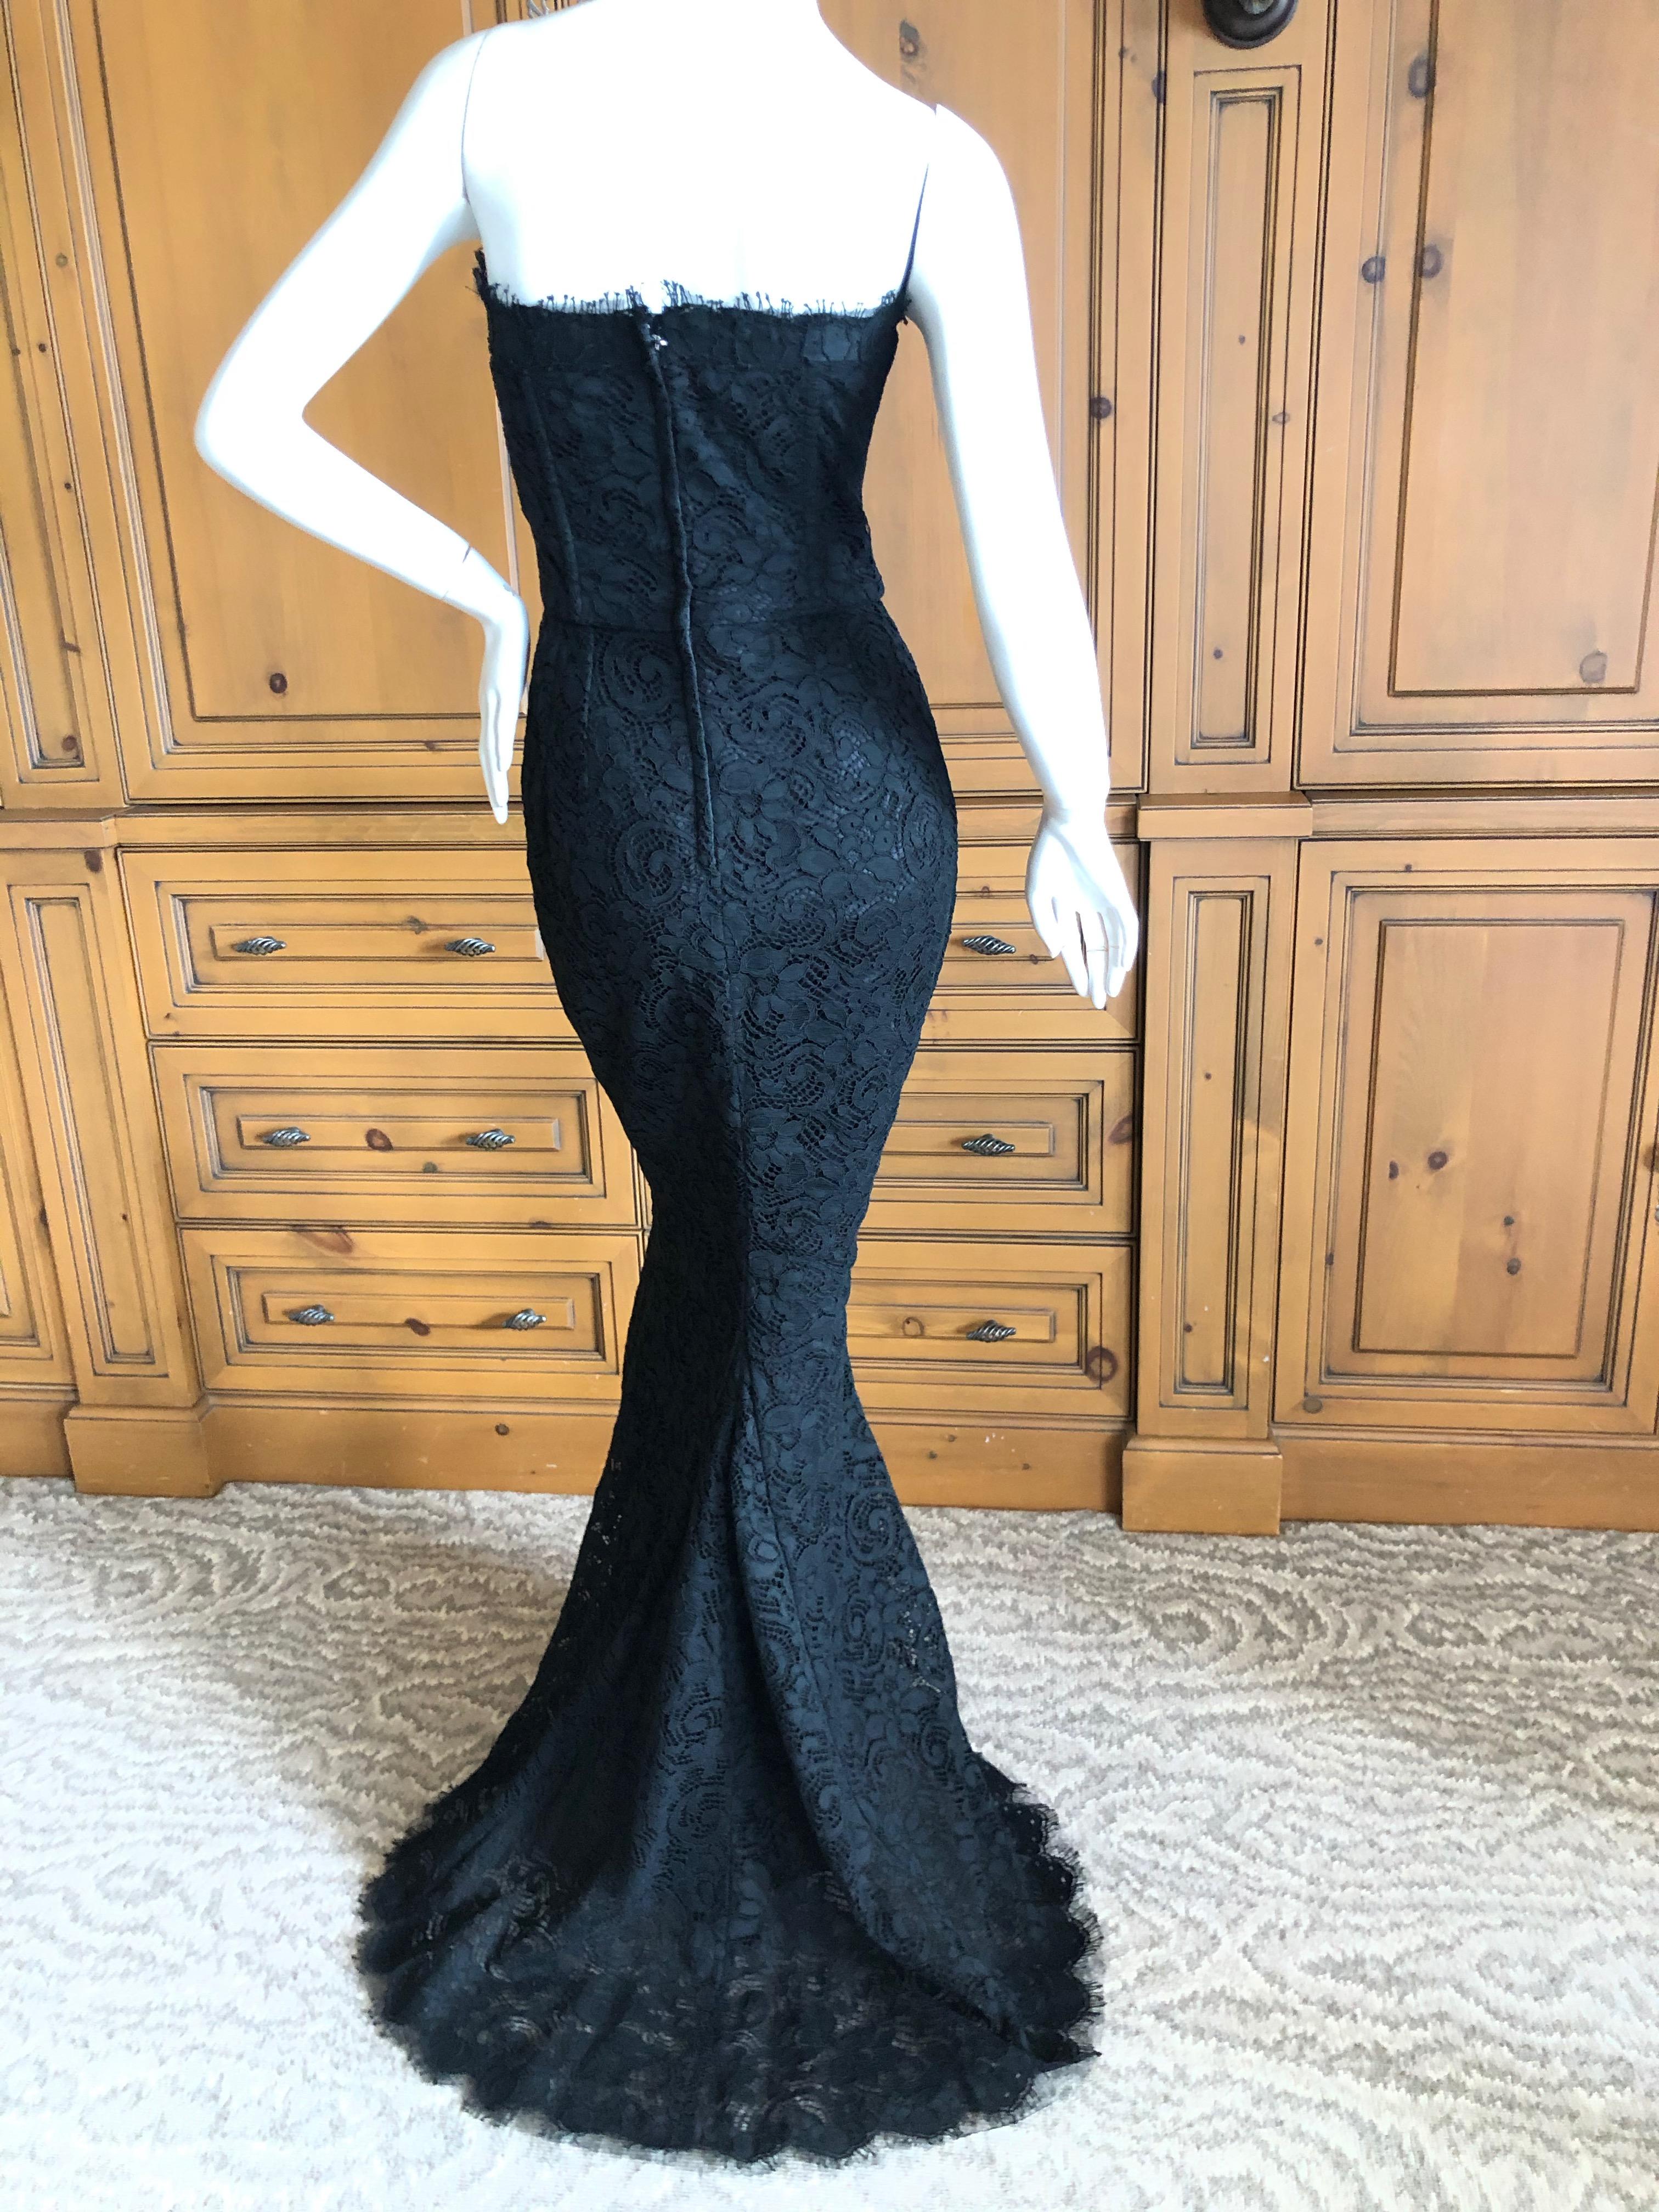 Dolce & Gabbana Vintage Black Lace Corseted Strapless Evening Gown  1